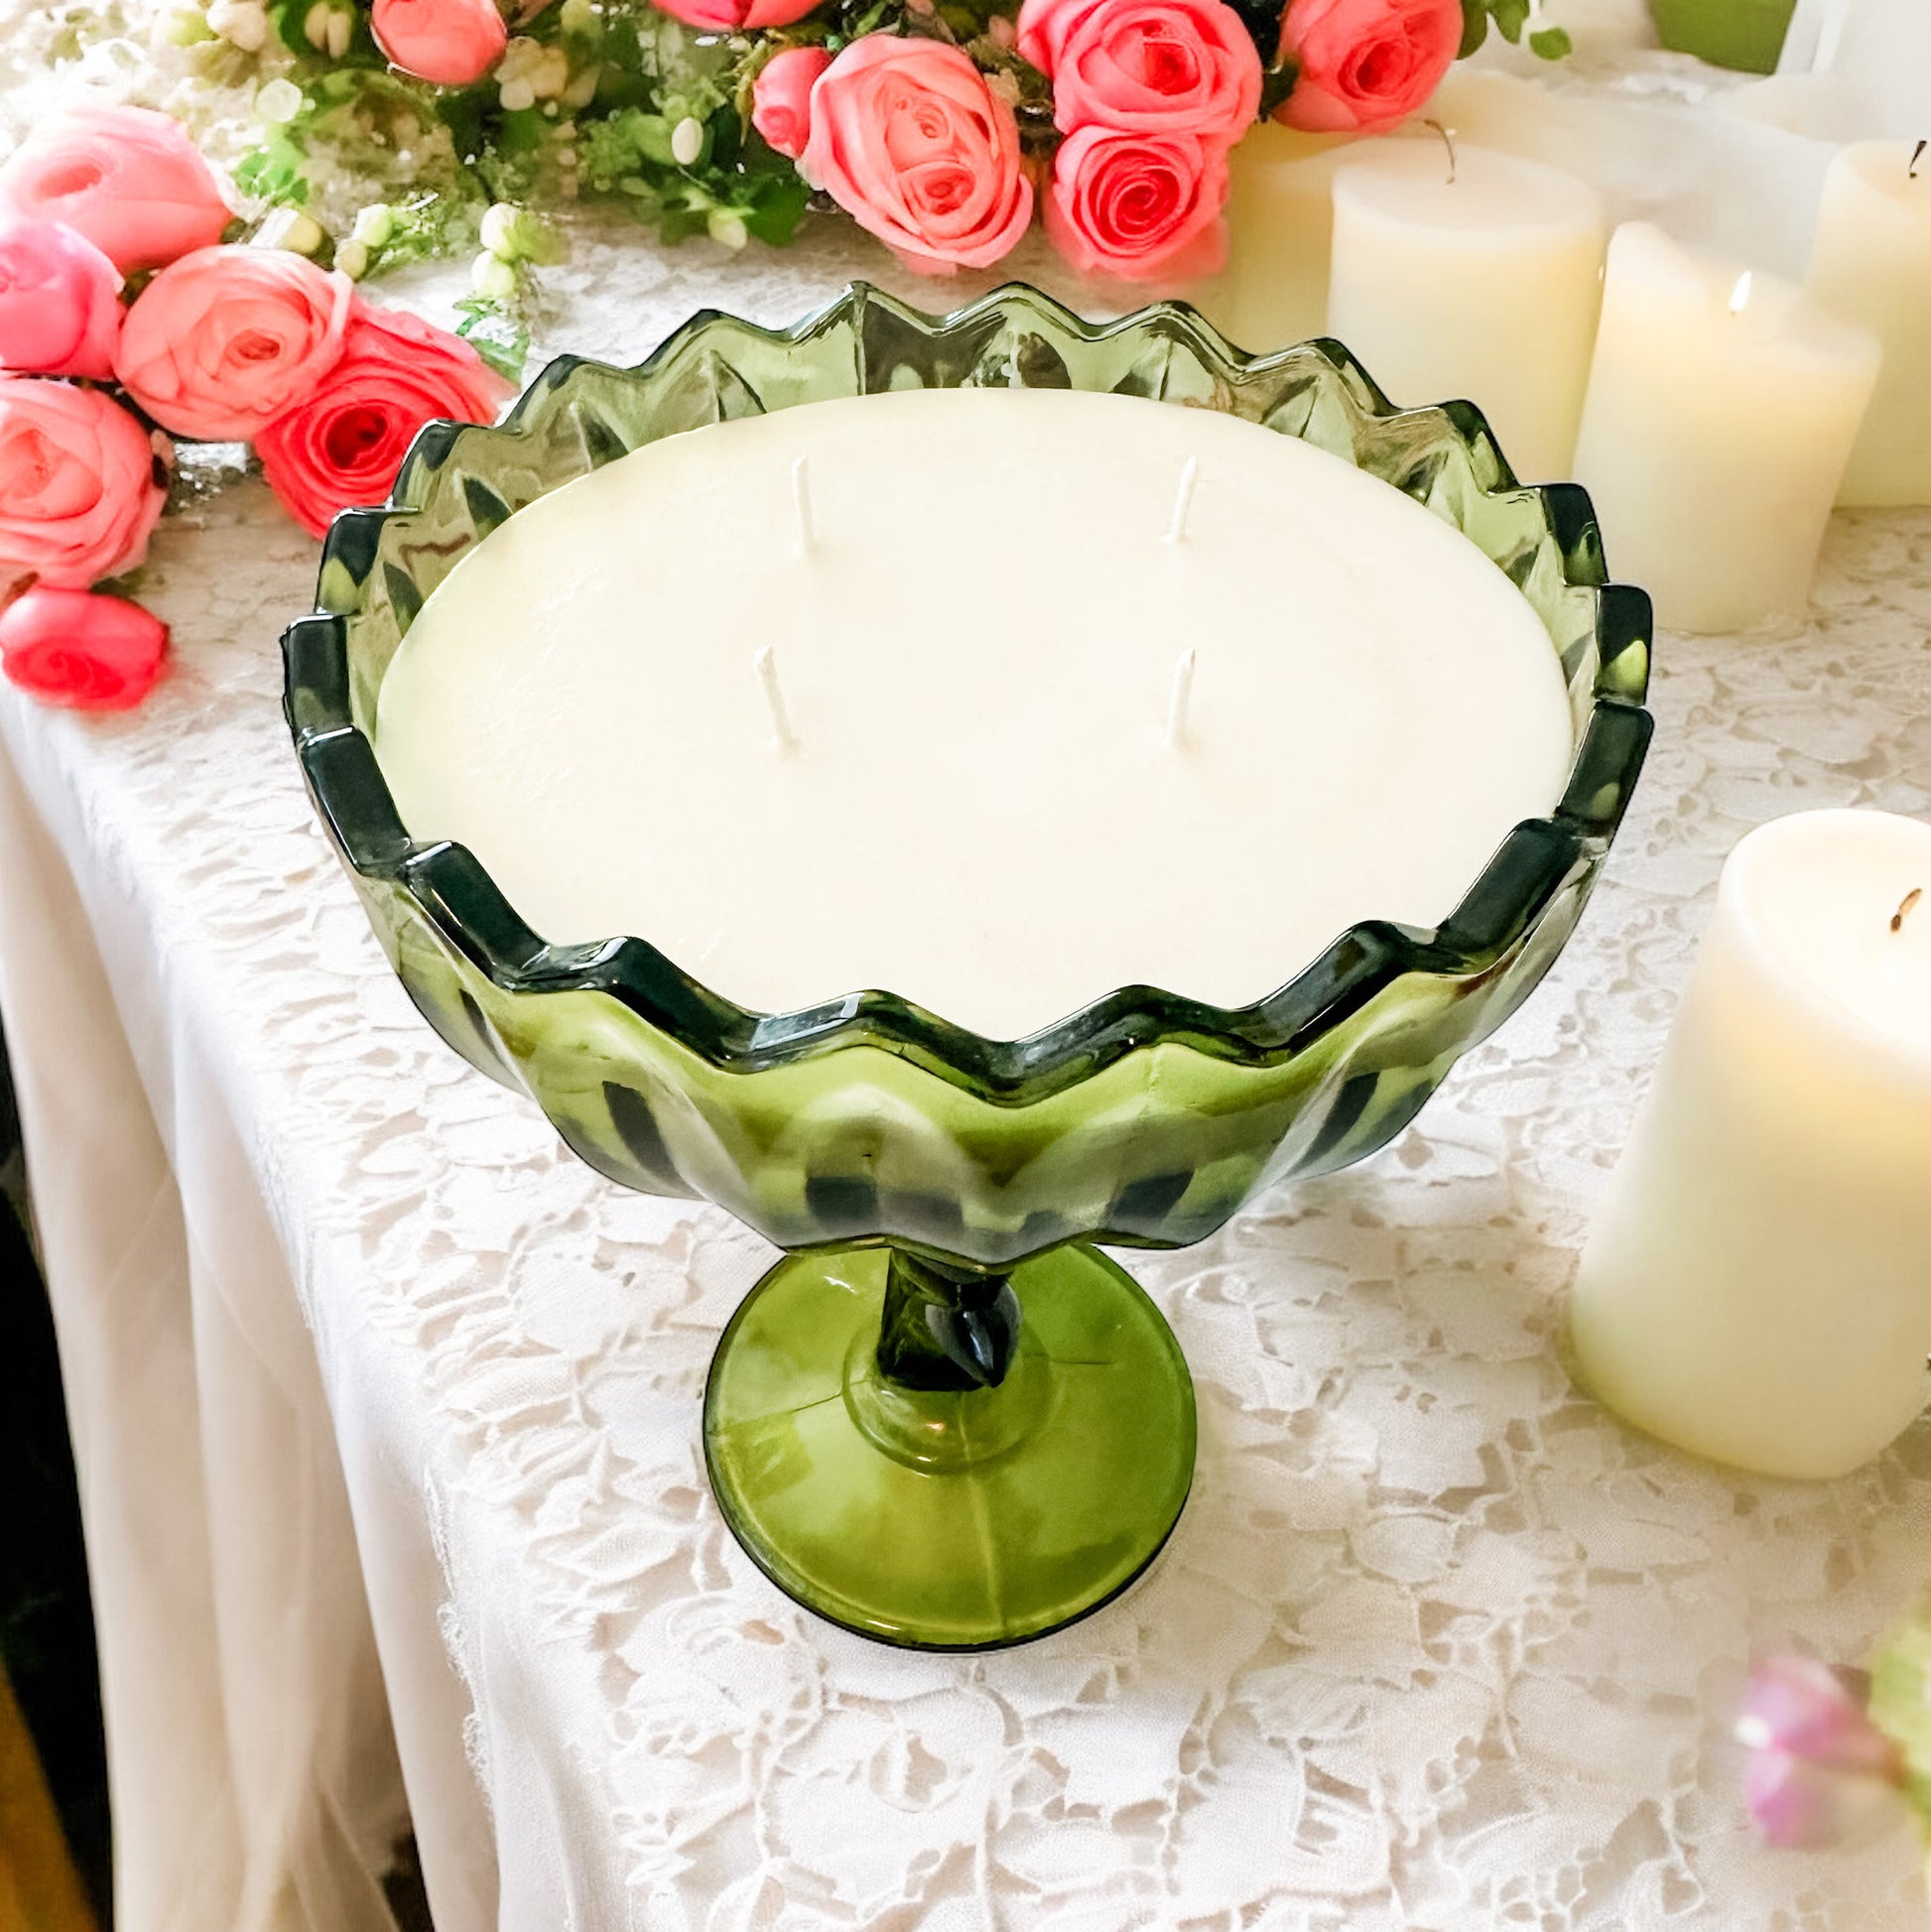 Gardenia Tuberose Candle in Vintage Glass Compote | RetroWix